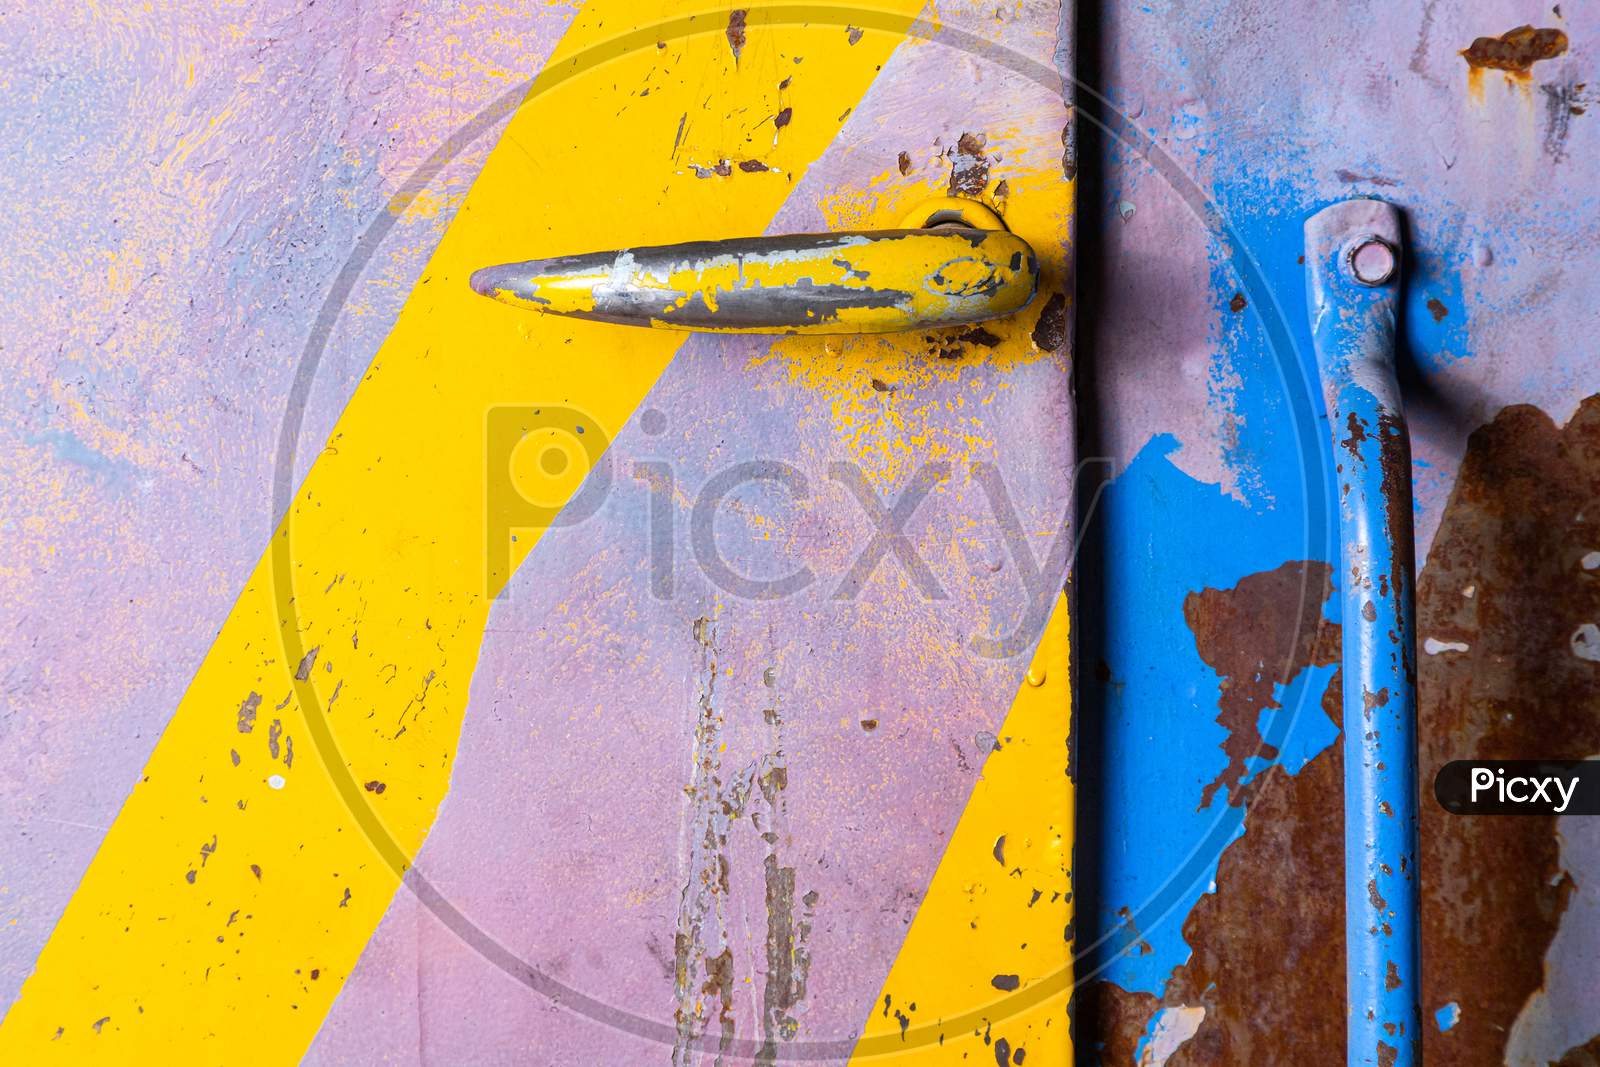 Violet Metal Wall With Yellow Diagonal Stripes, Texture Grunge Background. Geometric Colorful Door With Handle